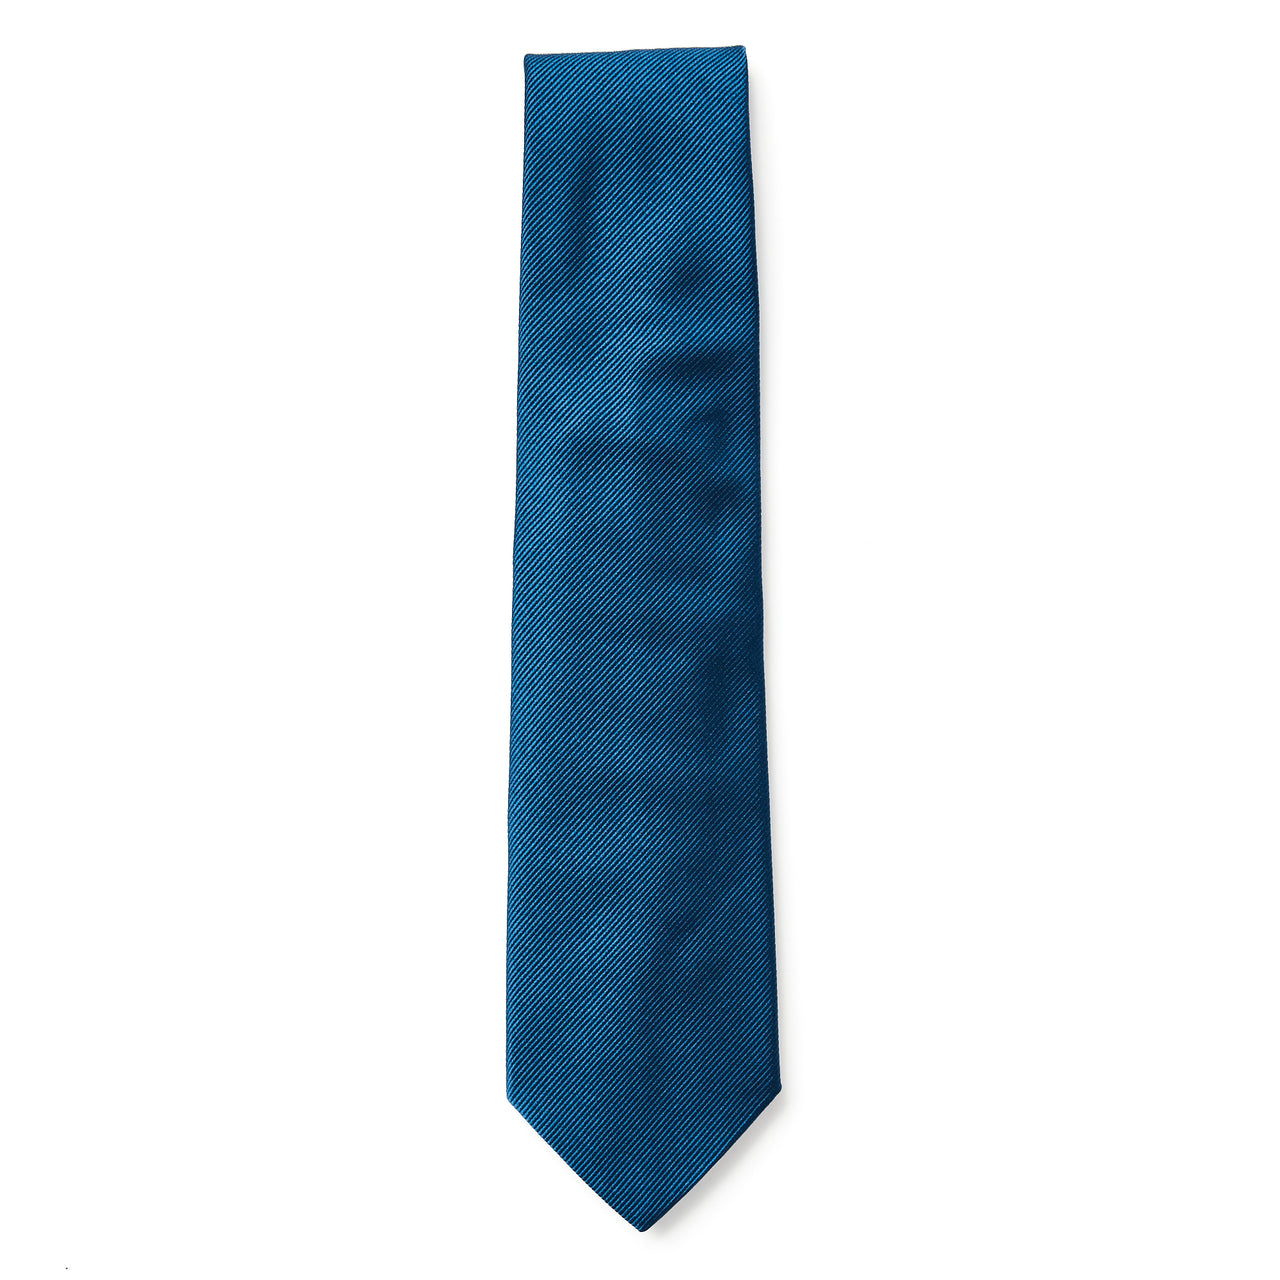 HENRY SARTORIAL 3 Fold Zeus Collection Tie TEAL